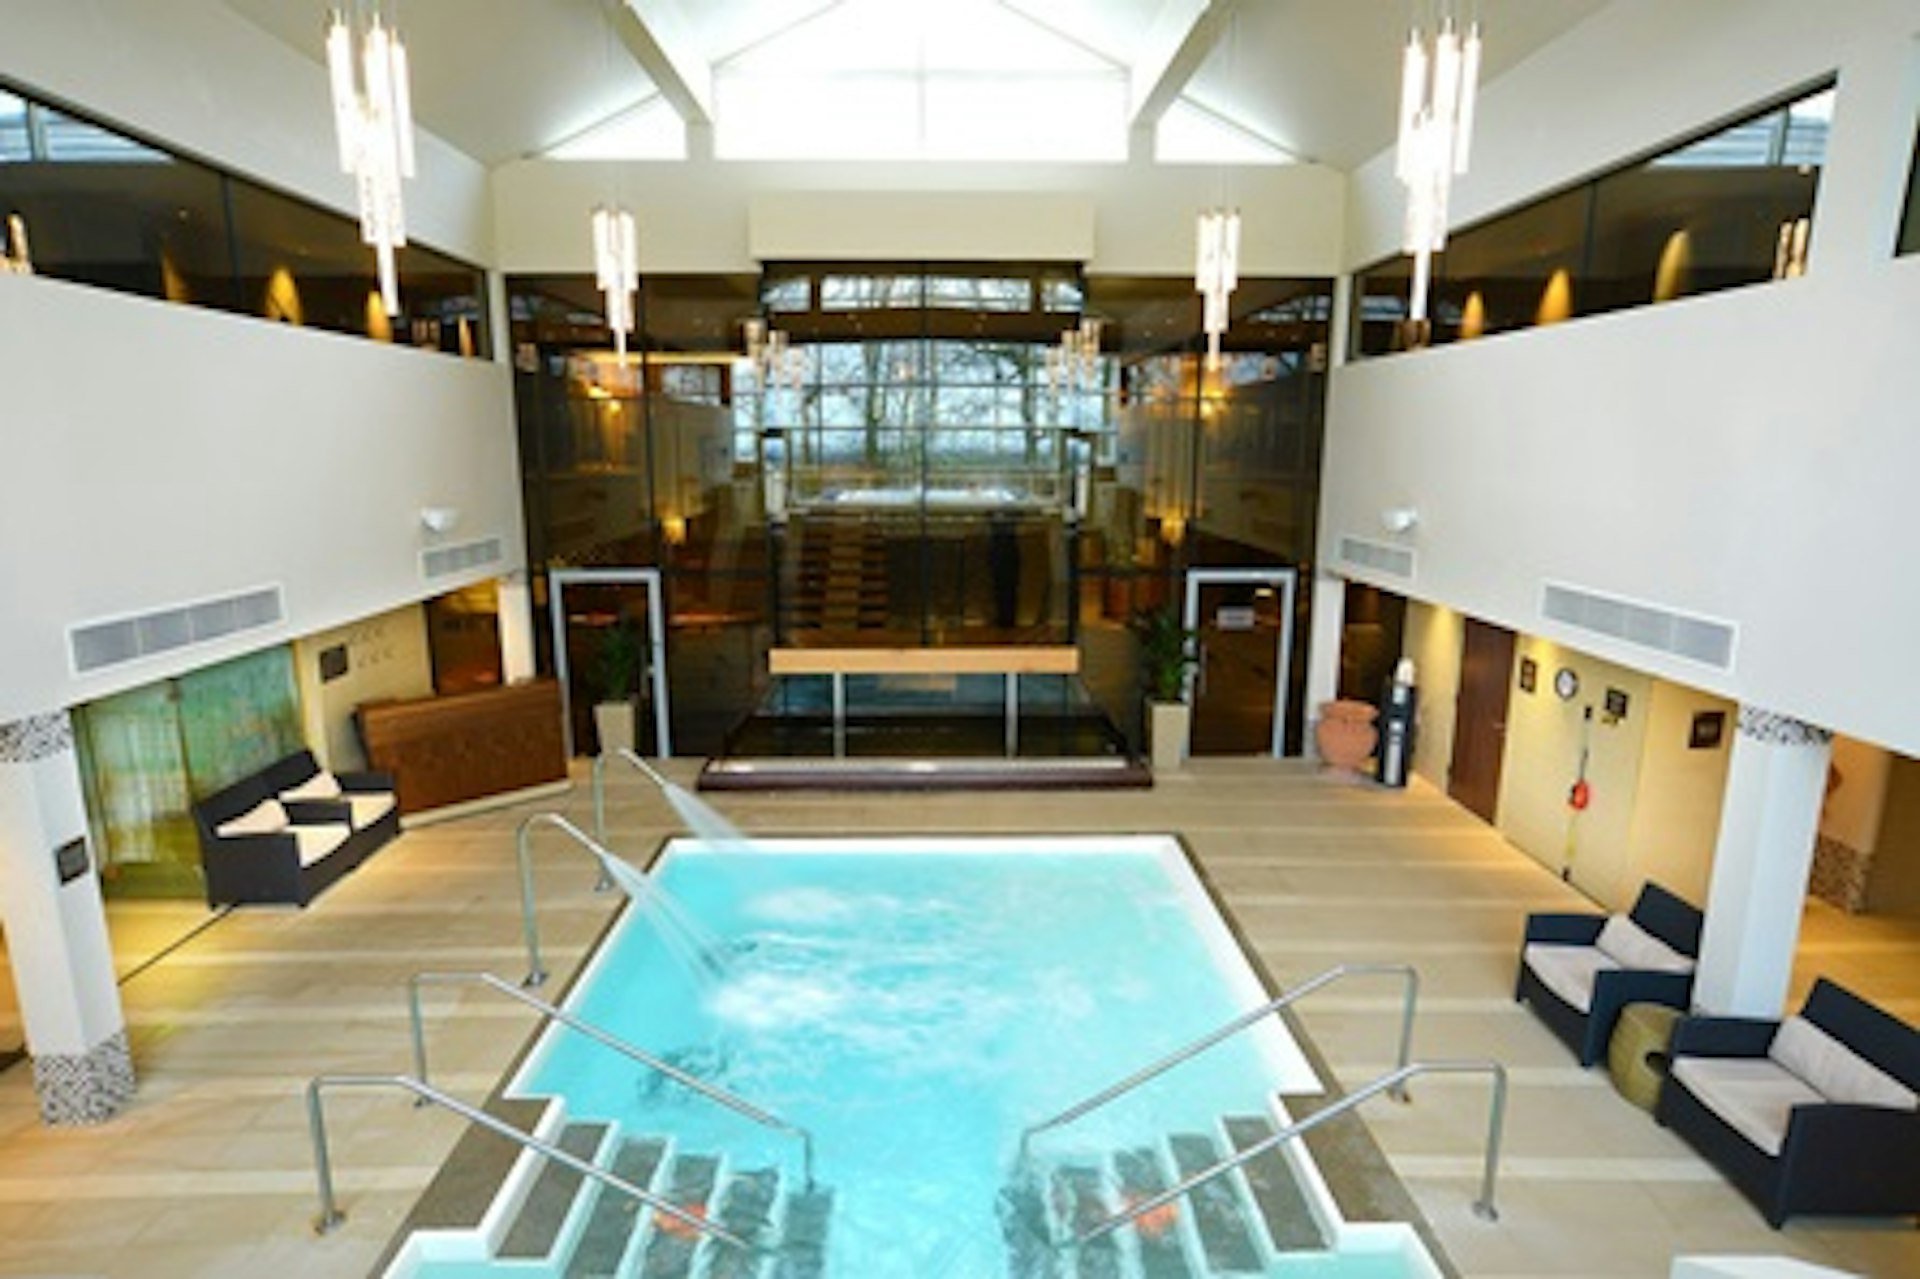 Weekday Aqua Thermal Journey with Lunch for Two at Ribby Hall Village 2